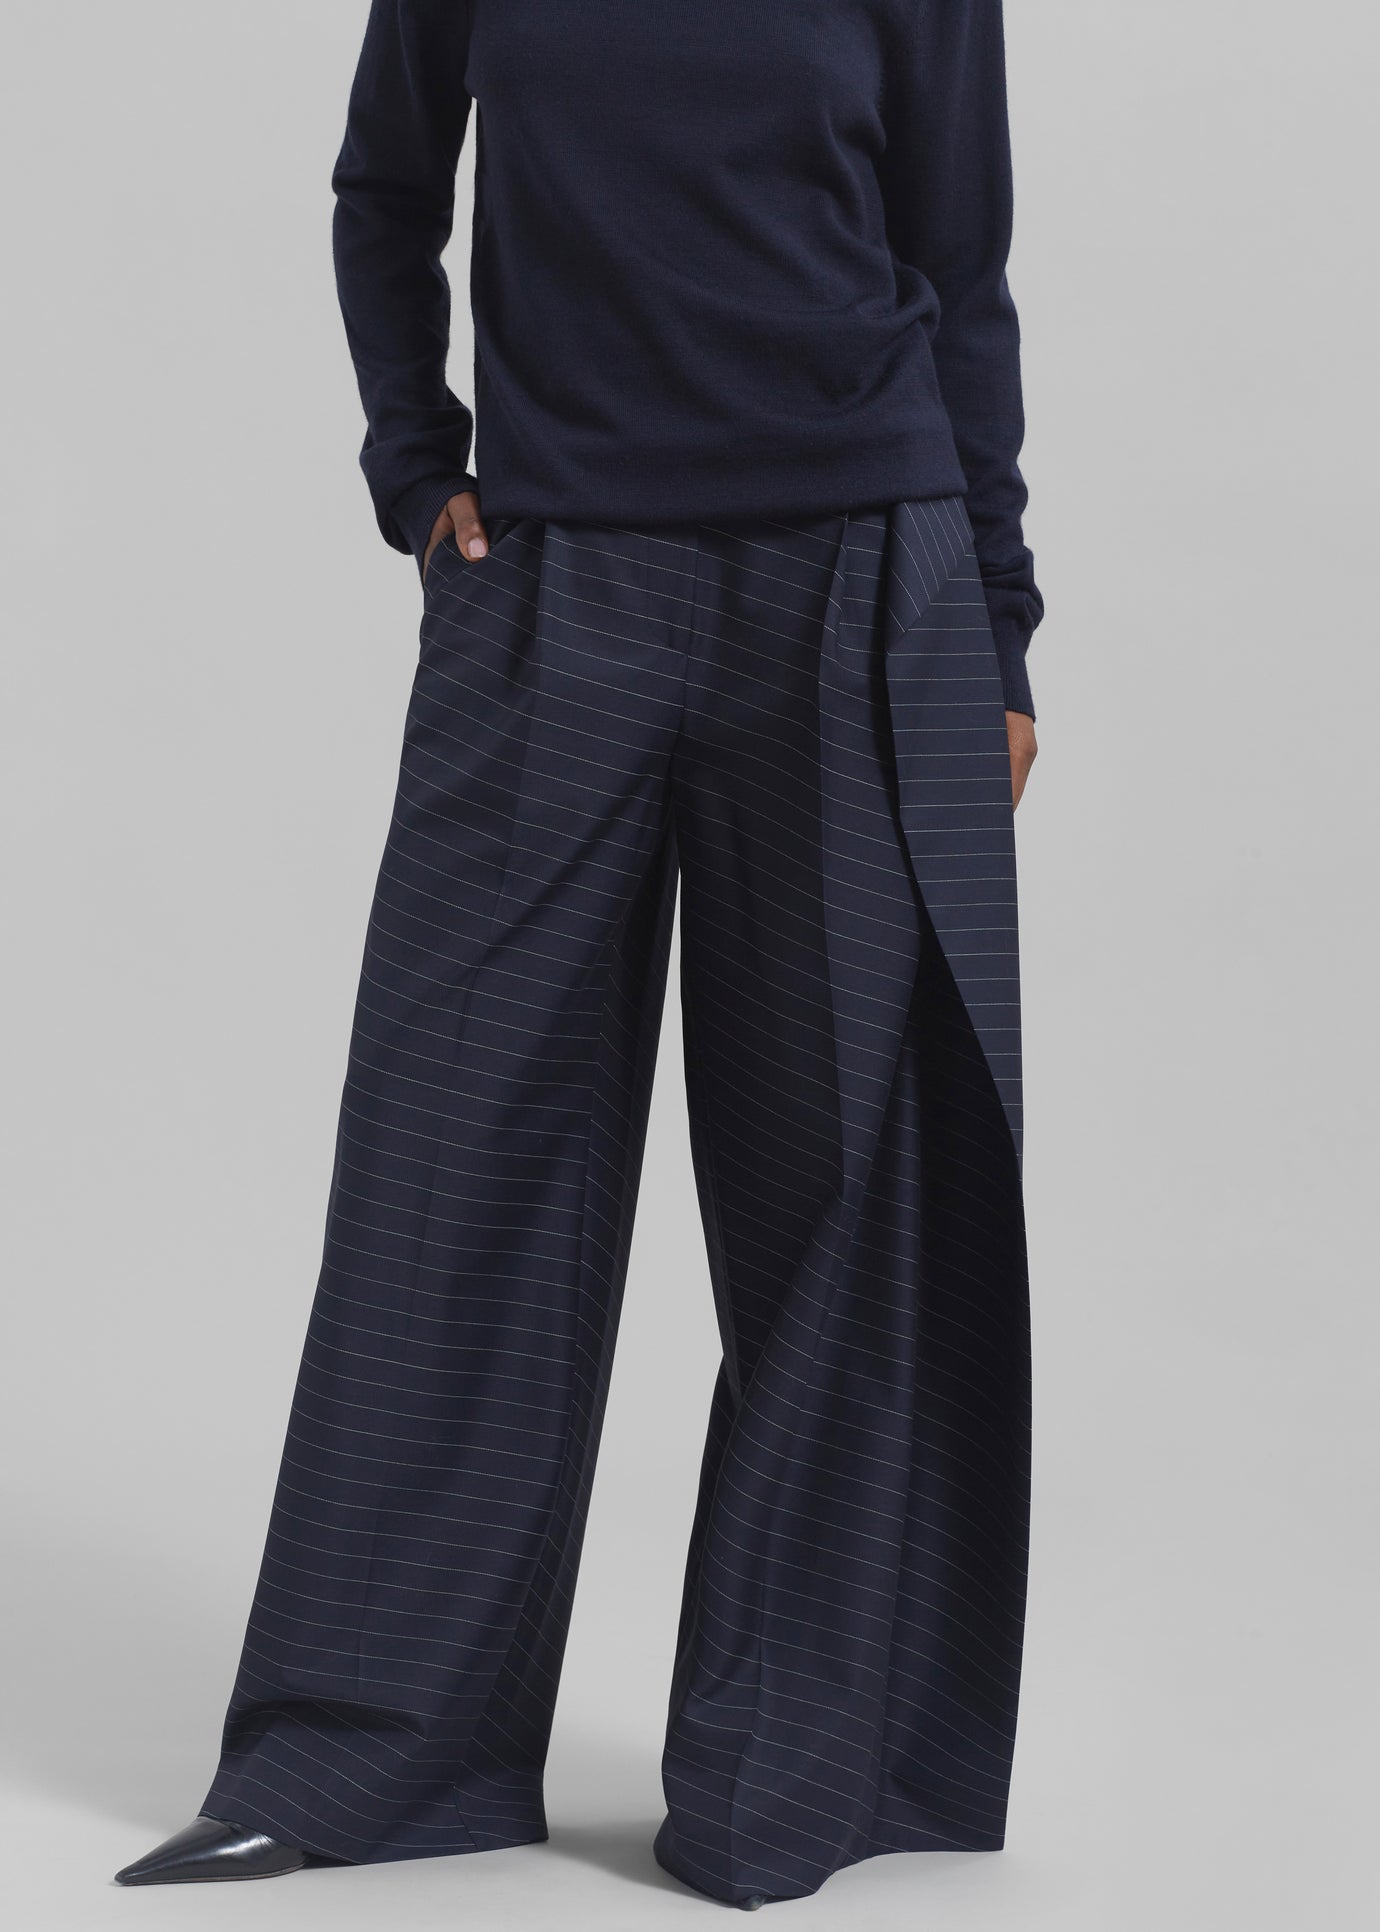 Uniqlo Mens Sweatpants  Knitted Track Pants (Jw Anderson) BLUE